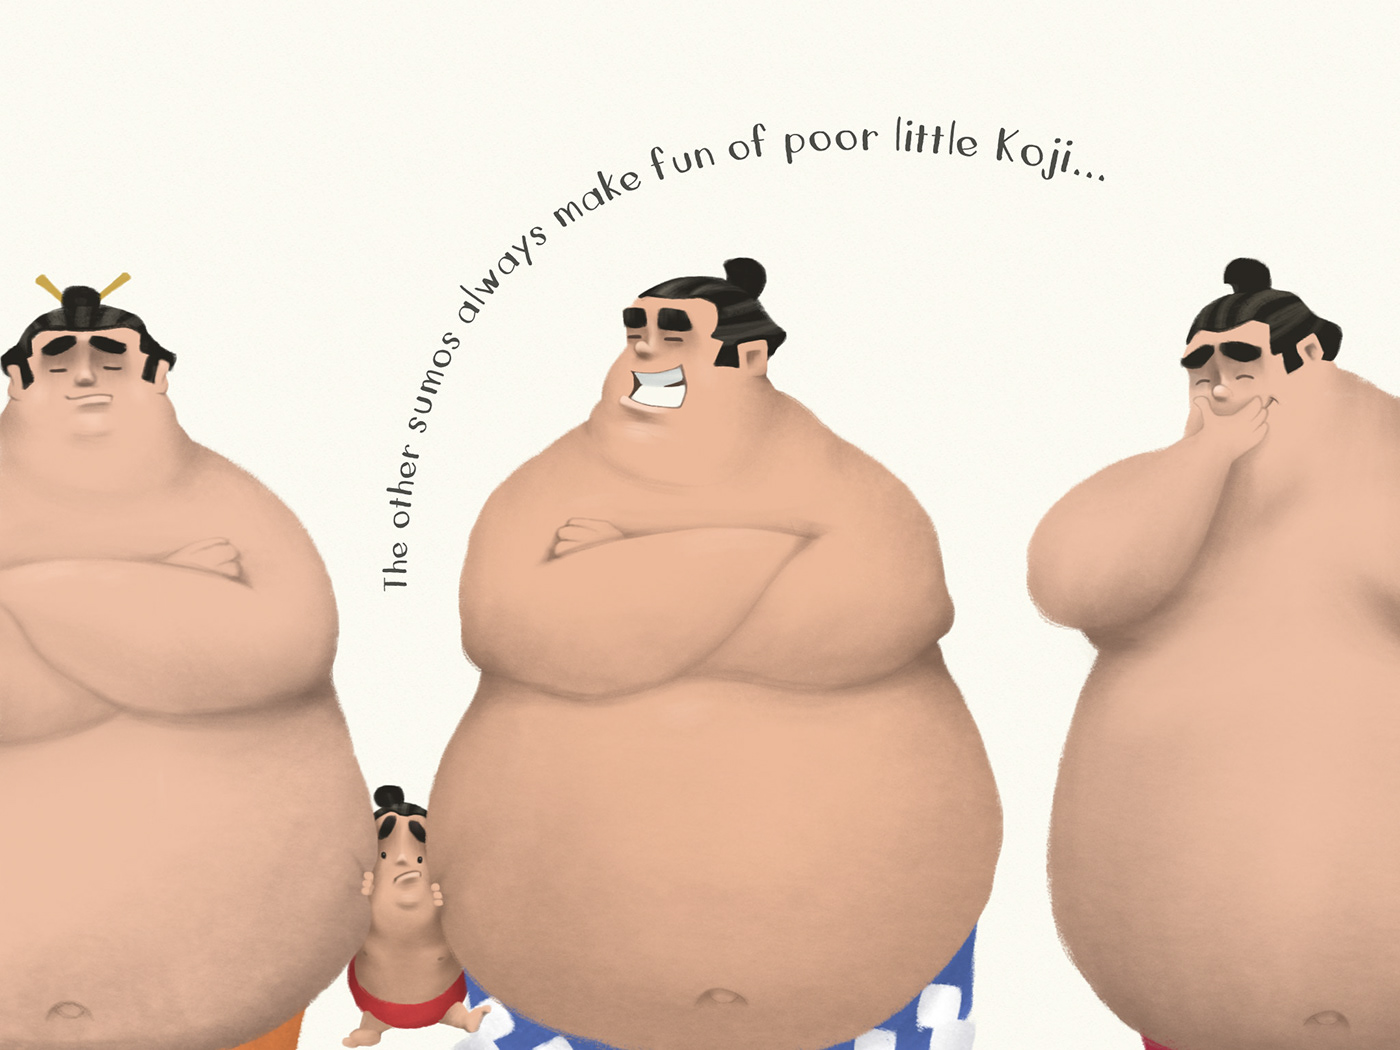 ILLUSTRATION  sumo sumo character book iBook kids book book illustration story